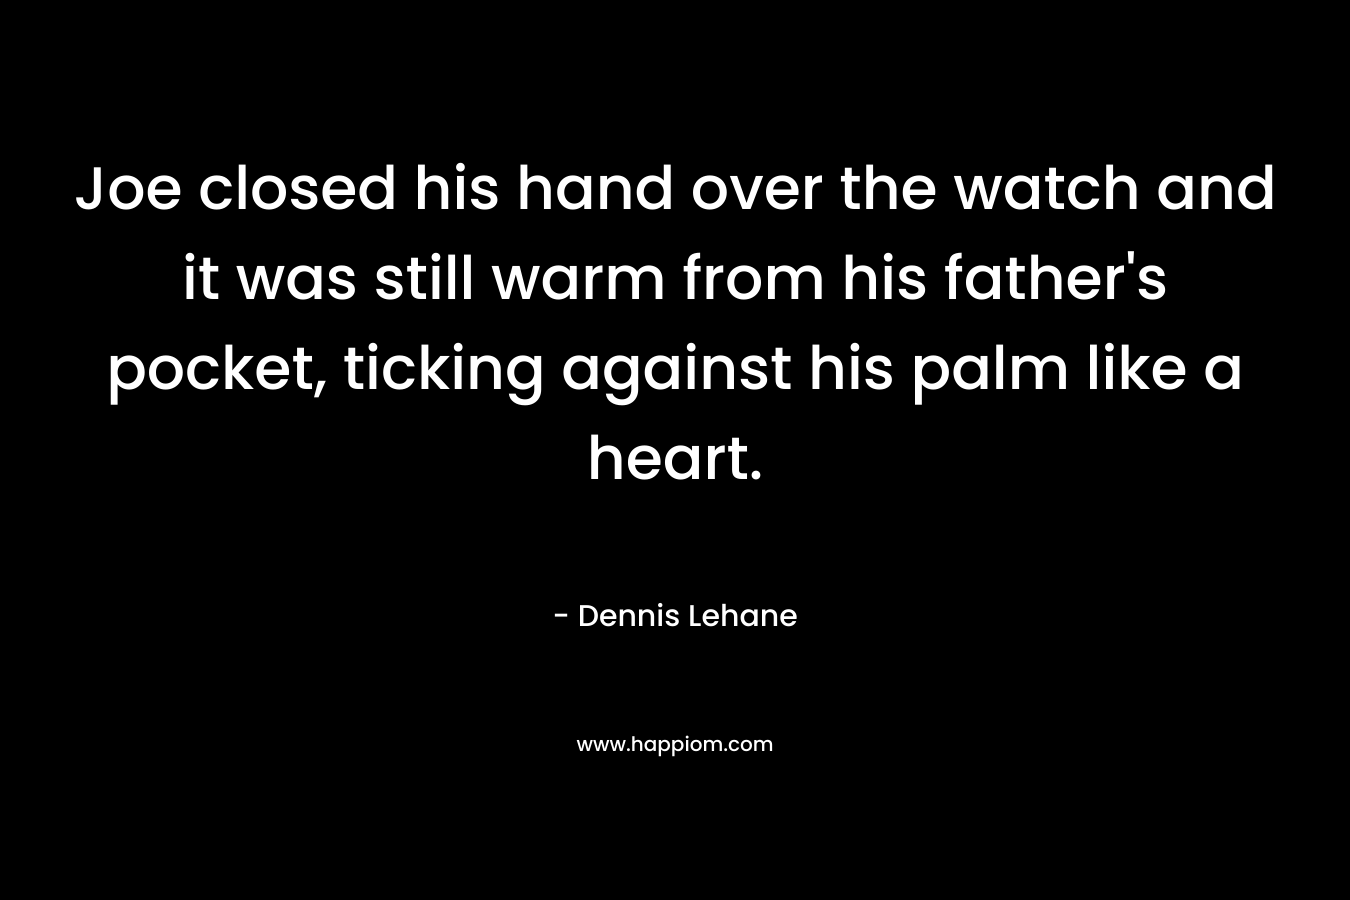 Joe closed his hand over the watch and it was still warm from his father’s pocket, ticking against his palm like a heart. – Dennis Lehane